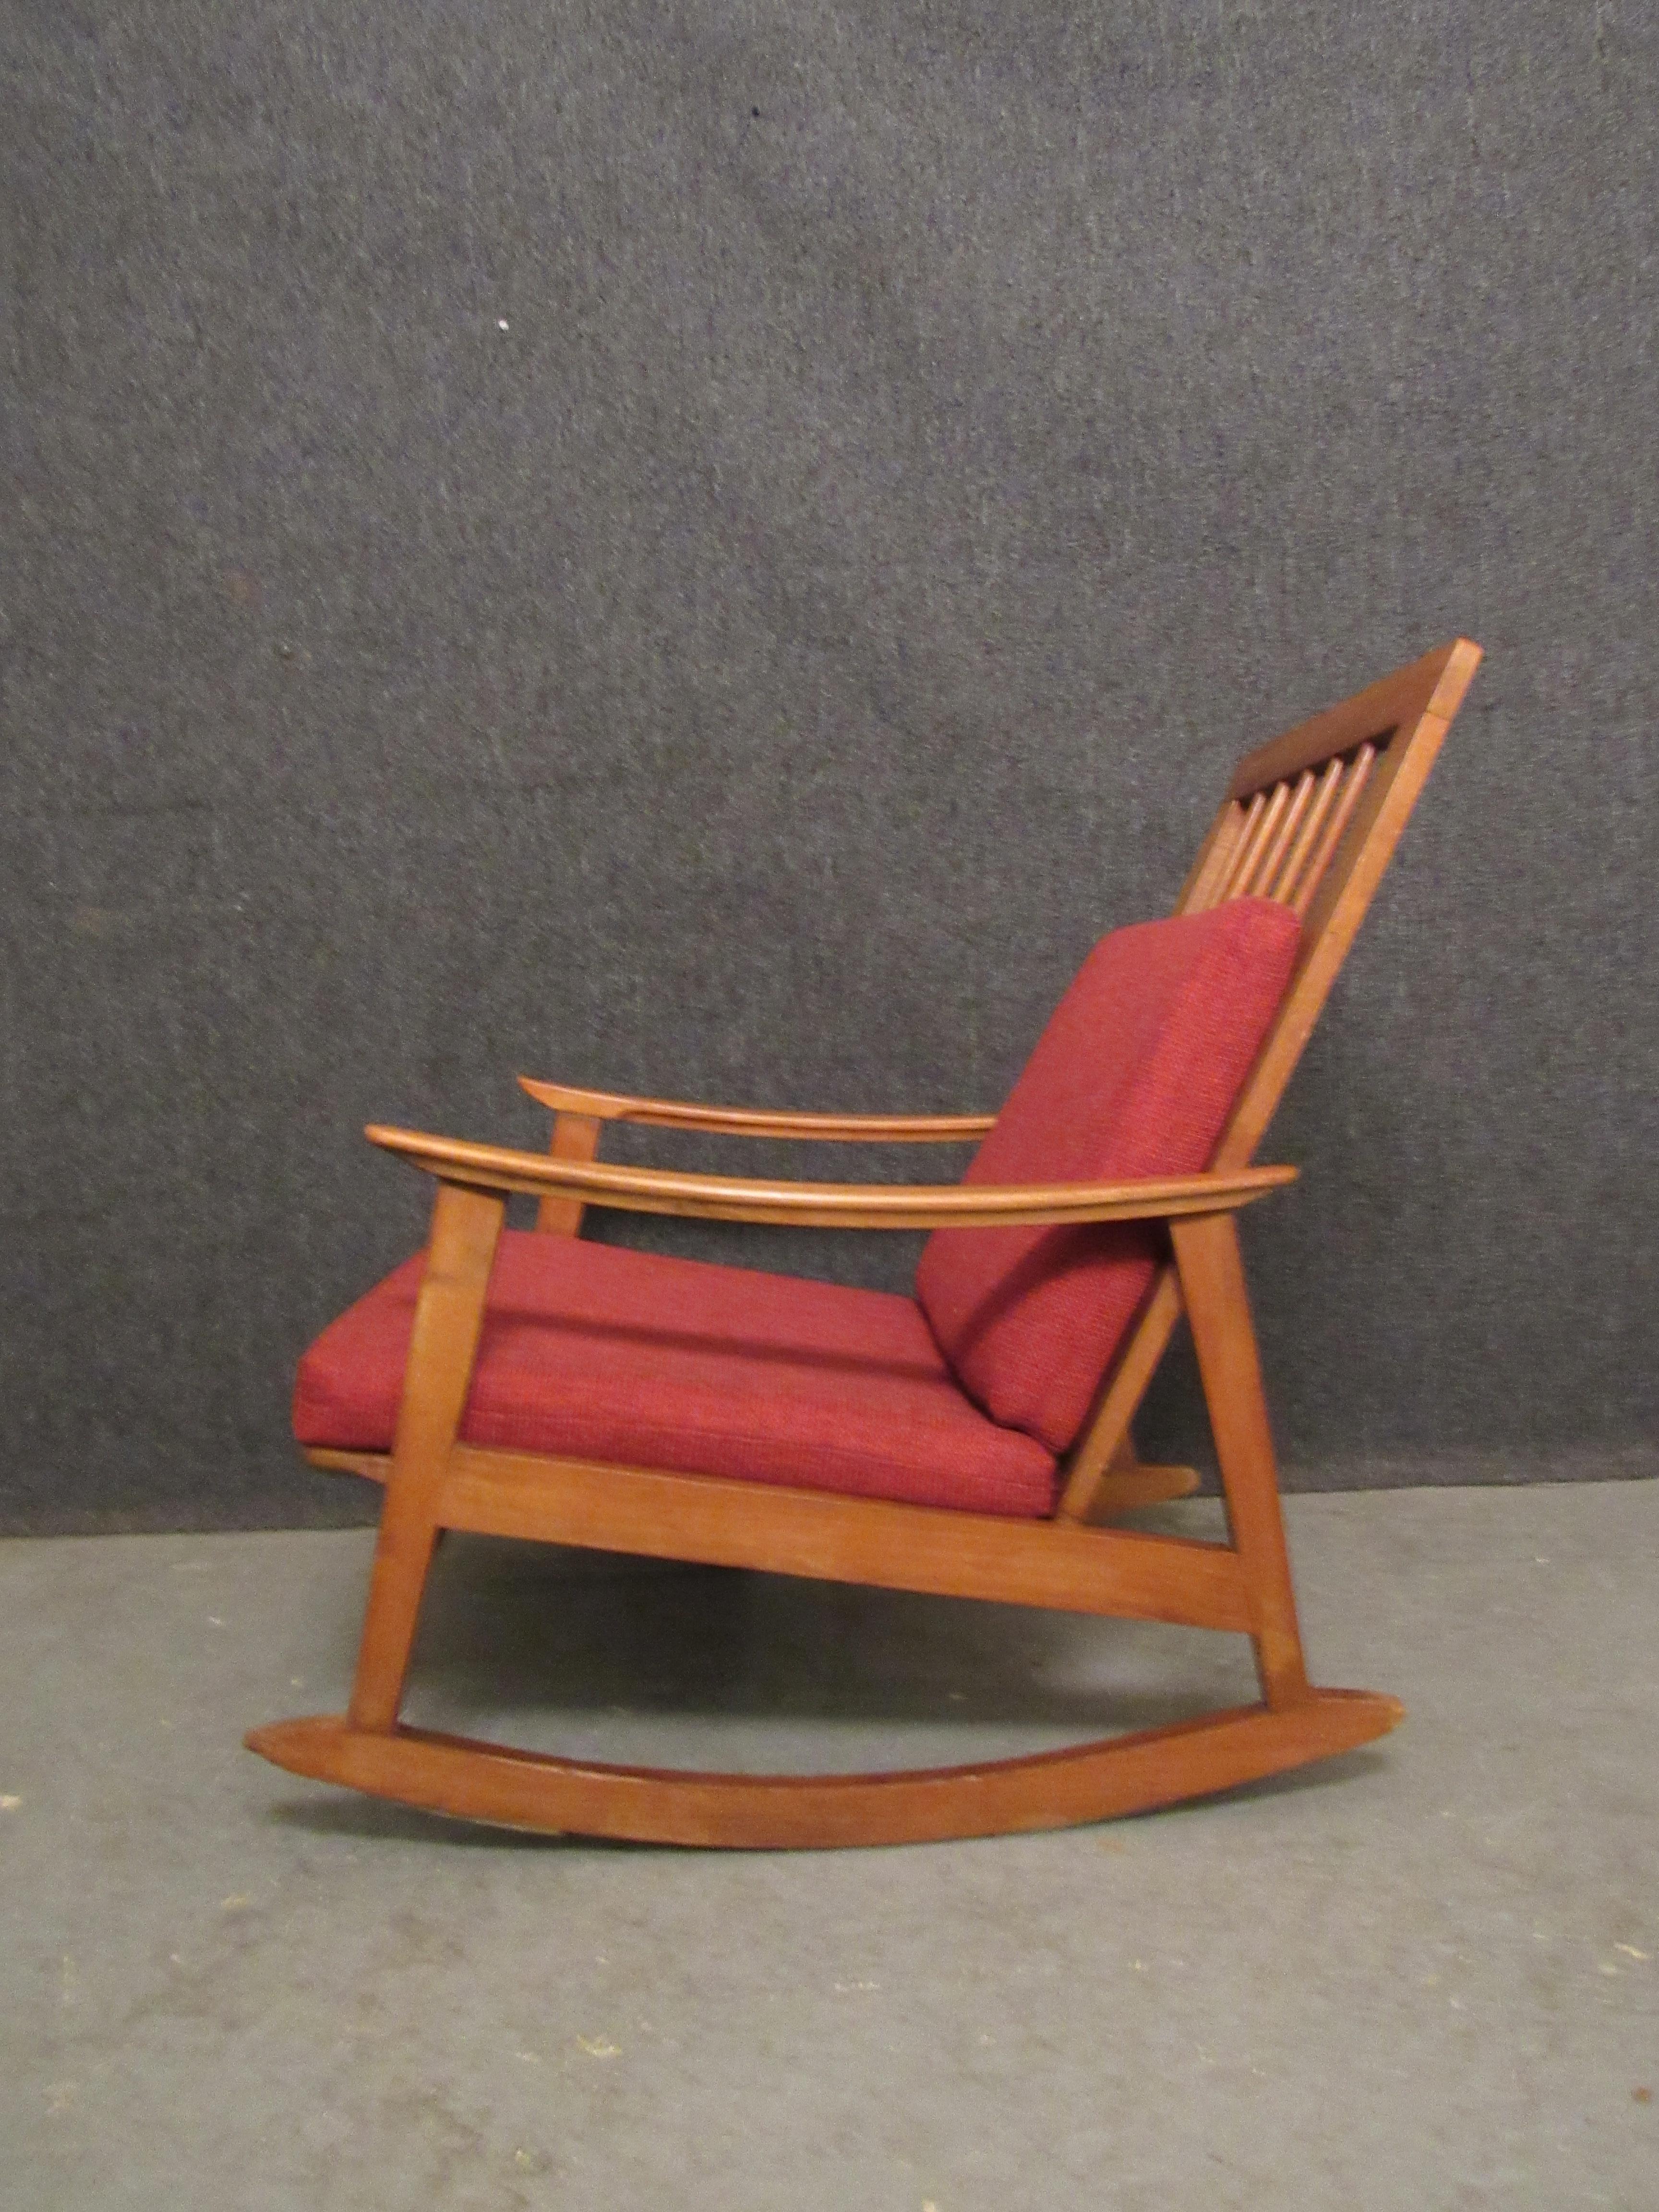 Kick back and relax with the vintage comfort of this mid-century modern oak rocker. The sloping arms and feet gives classic Scandinavian flare into any space. A tall spindle back peaks out from behind the pair of wooly red cushions, creating a